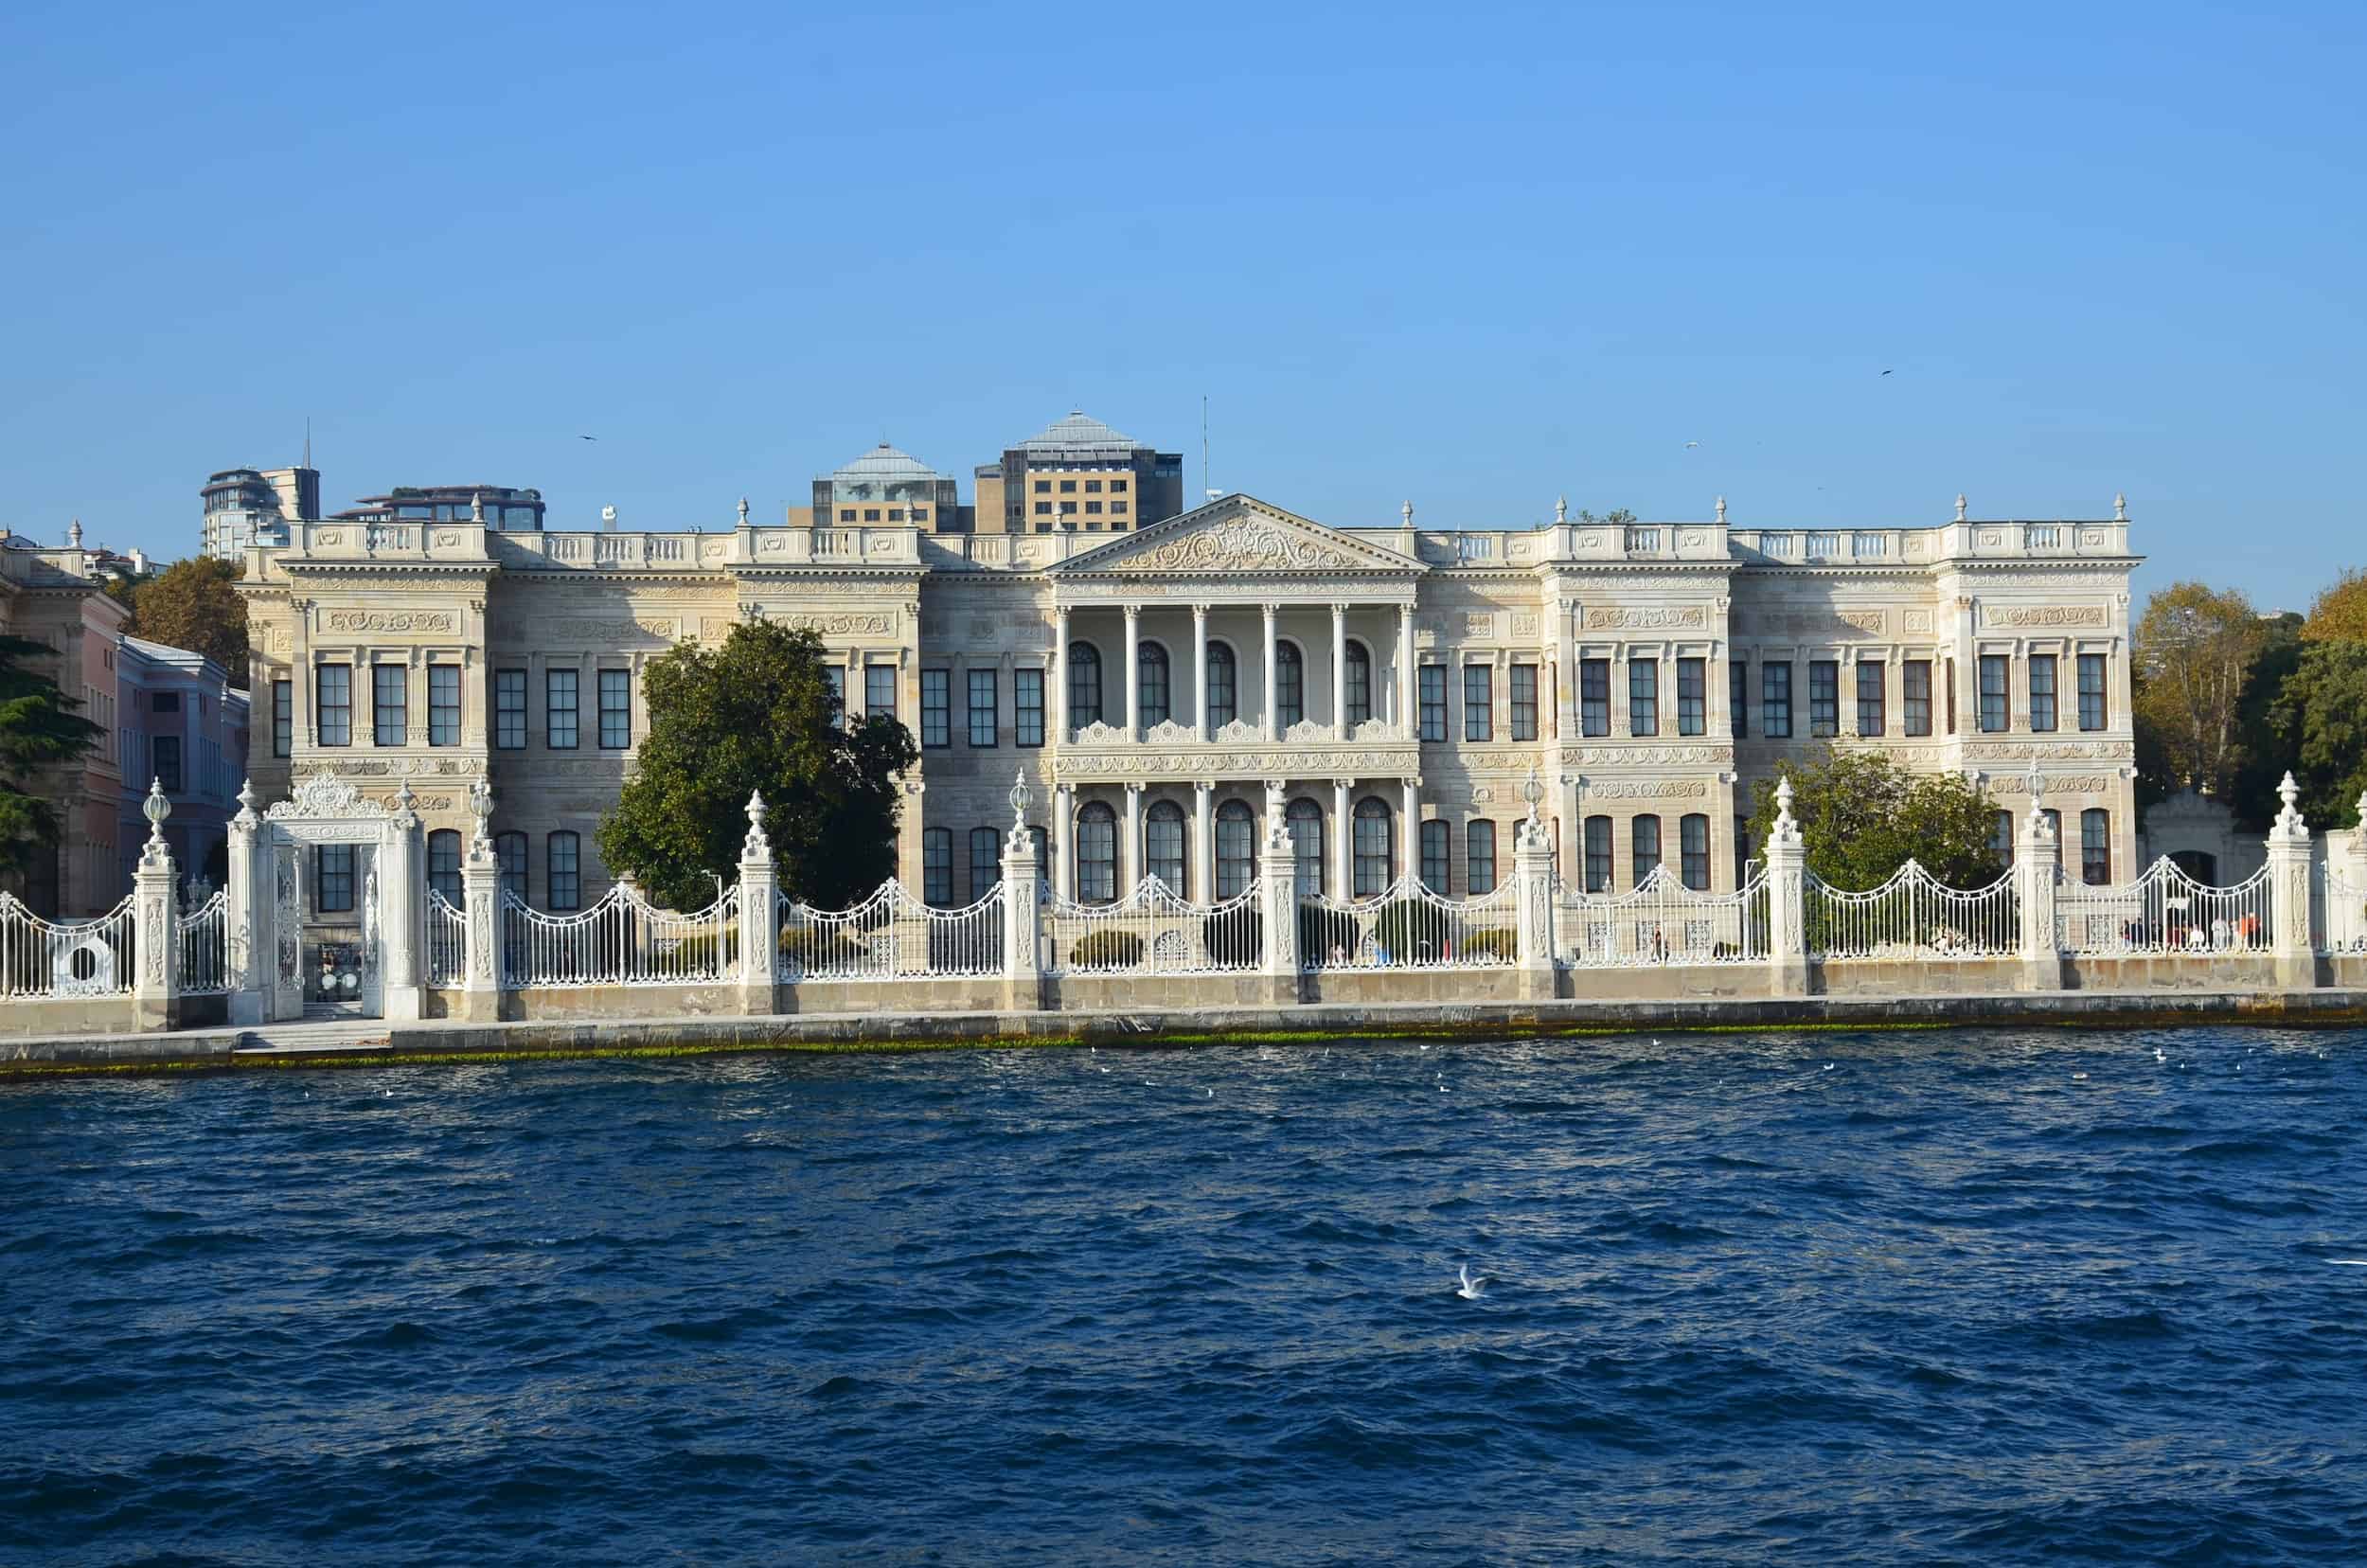 Apartment of the Crown Prince at Dolmabahçe Palace in Istanbul, Turkey